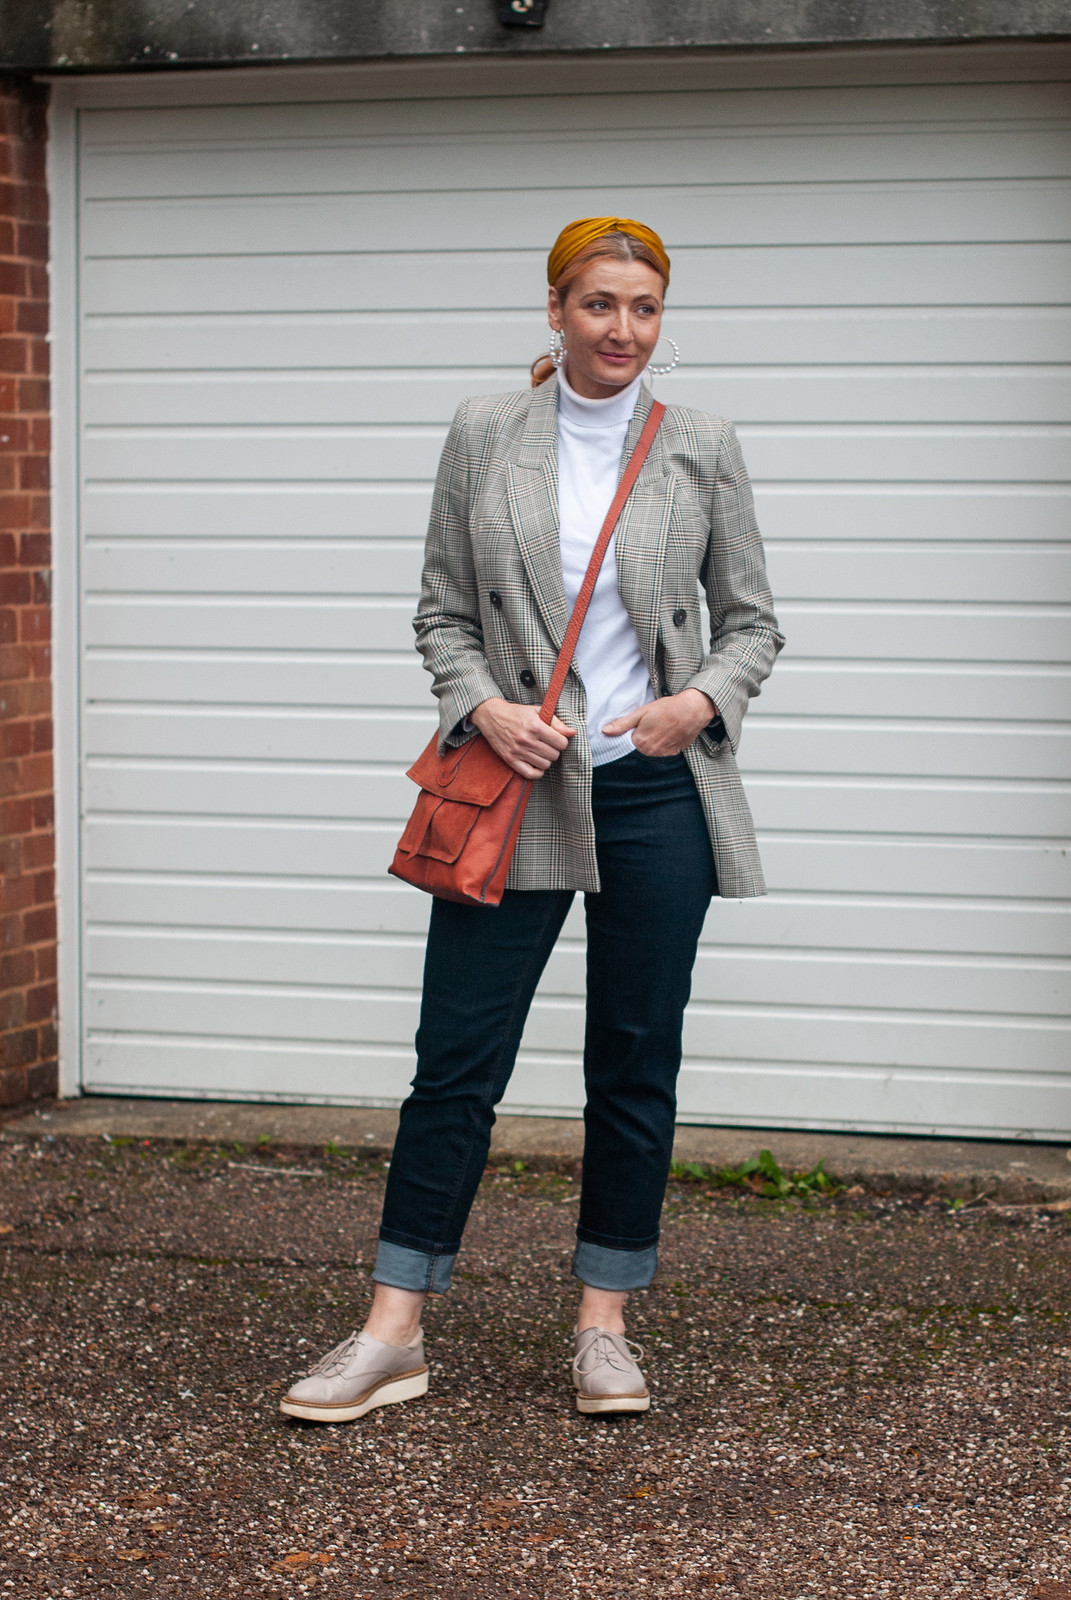 A Classic Preppy Look of Check Blazer, Roll Neck and Jeans | Not Dressed As Lamb, Over 40 Fashion and Style